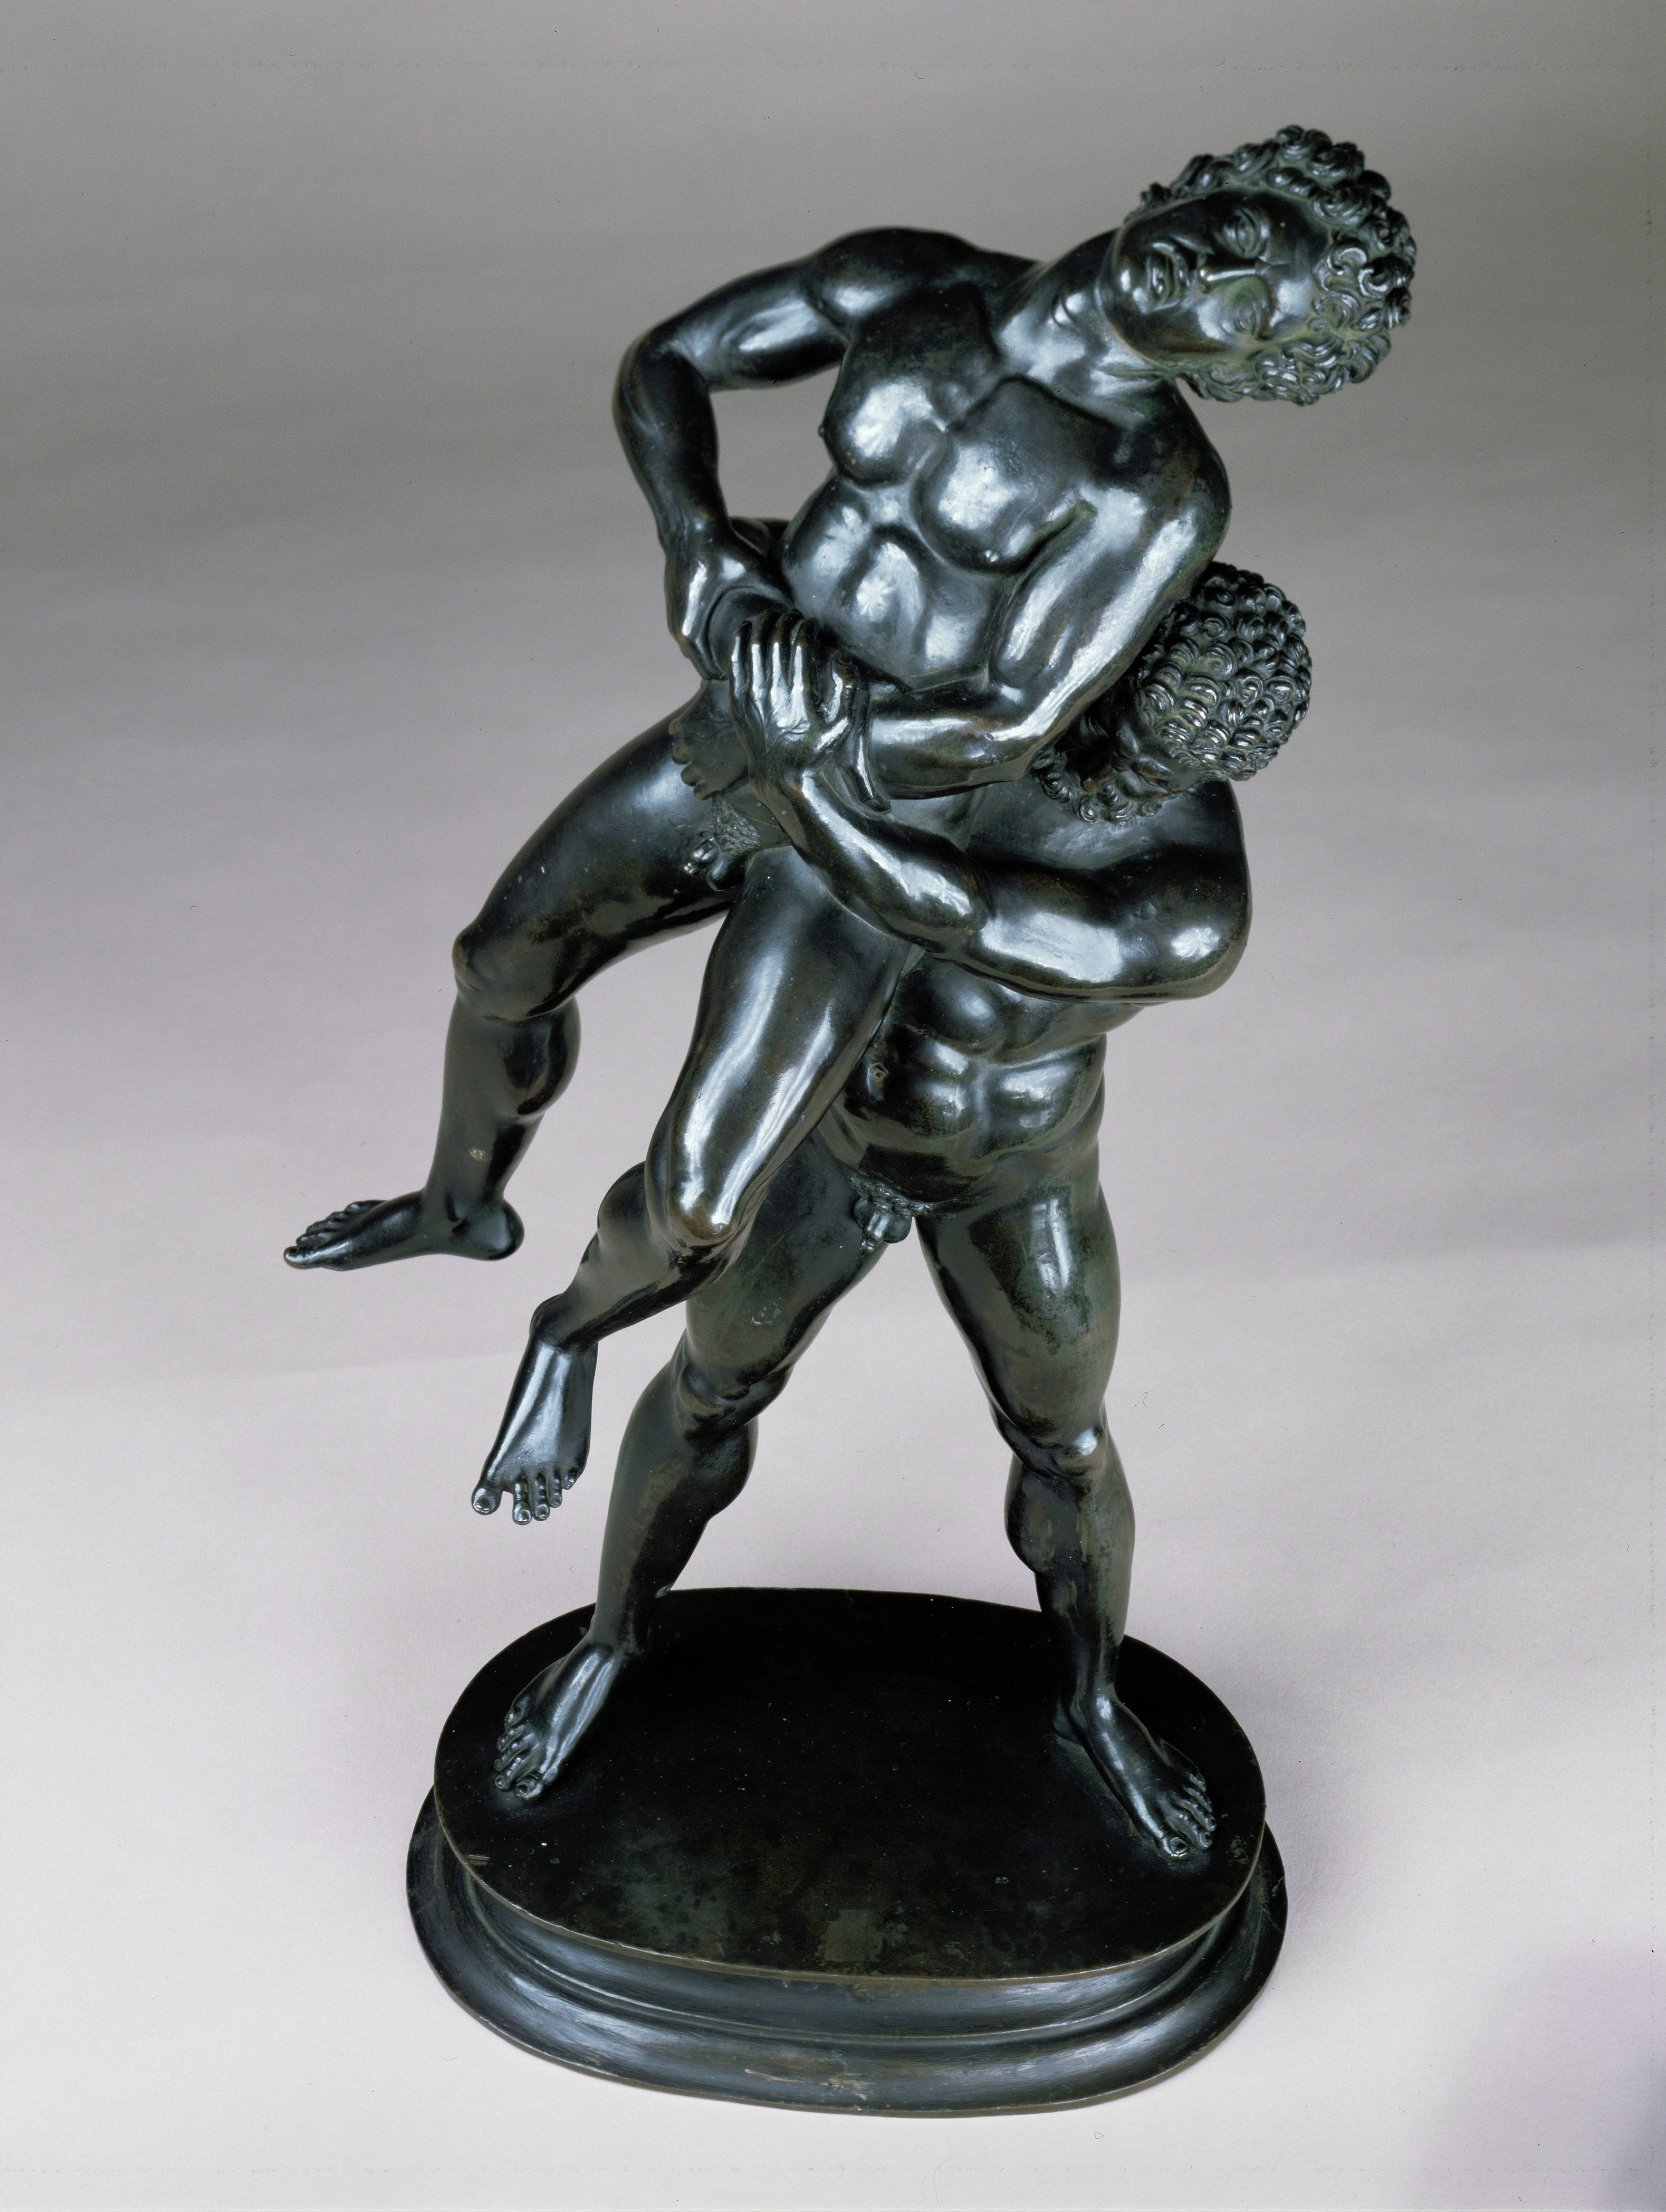 Antico<br /><i>Hercules and Antaeus</i>, 1519<br />Bronze, h. with base 39.6 cm (15 5/8 in.)<br />Kunsthistorisches Museum, Vienna, Kunstkammer<br />Erich Lessing/Art Resource, NY